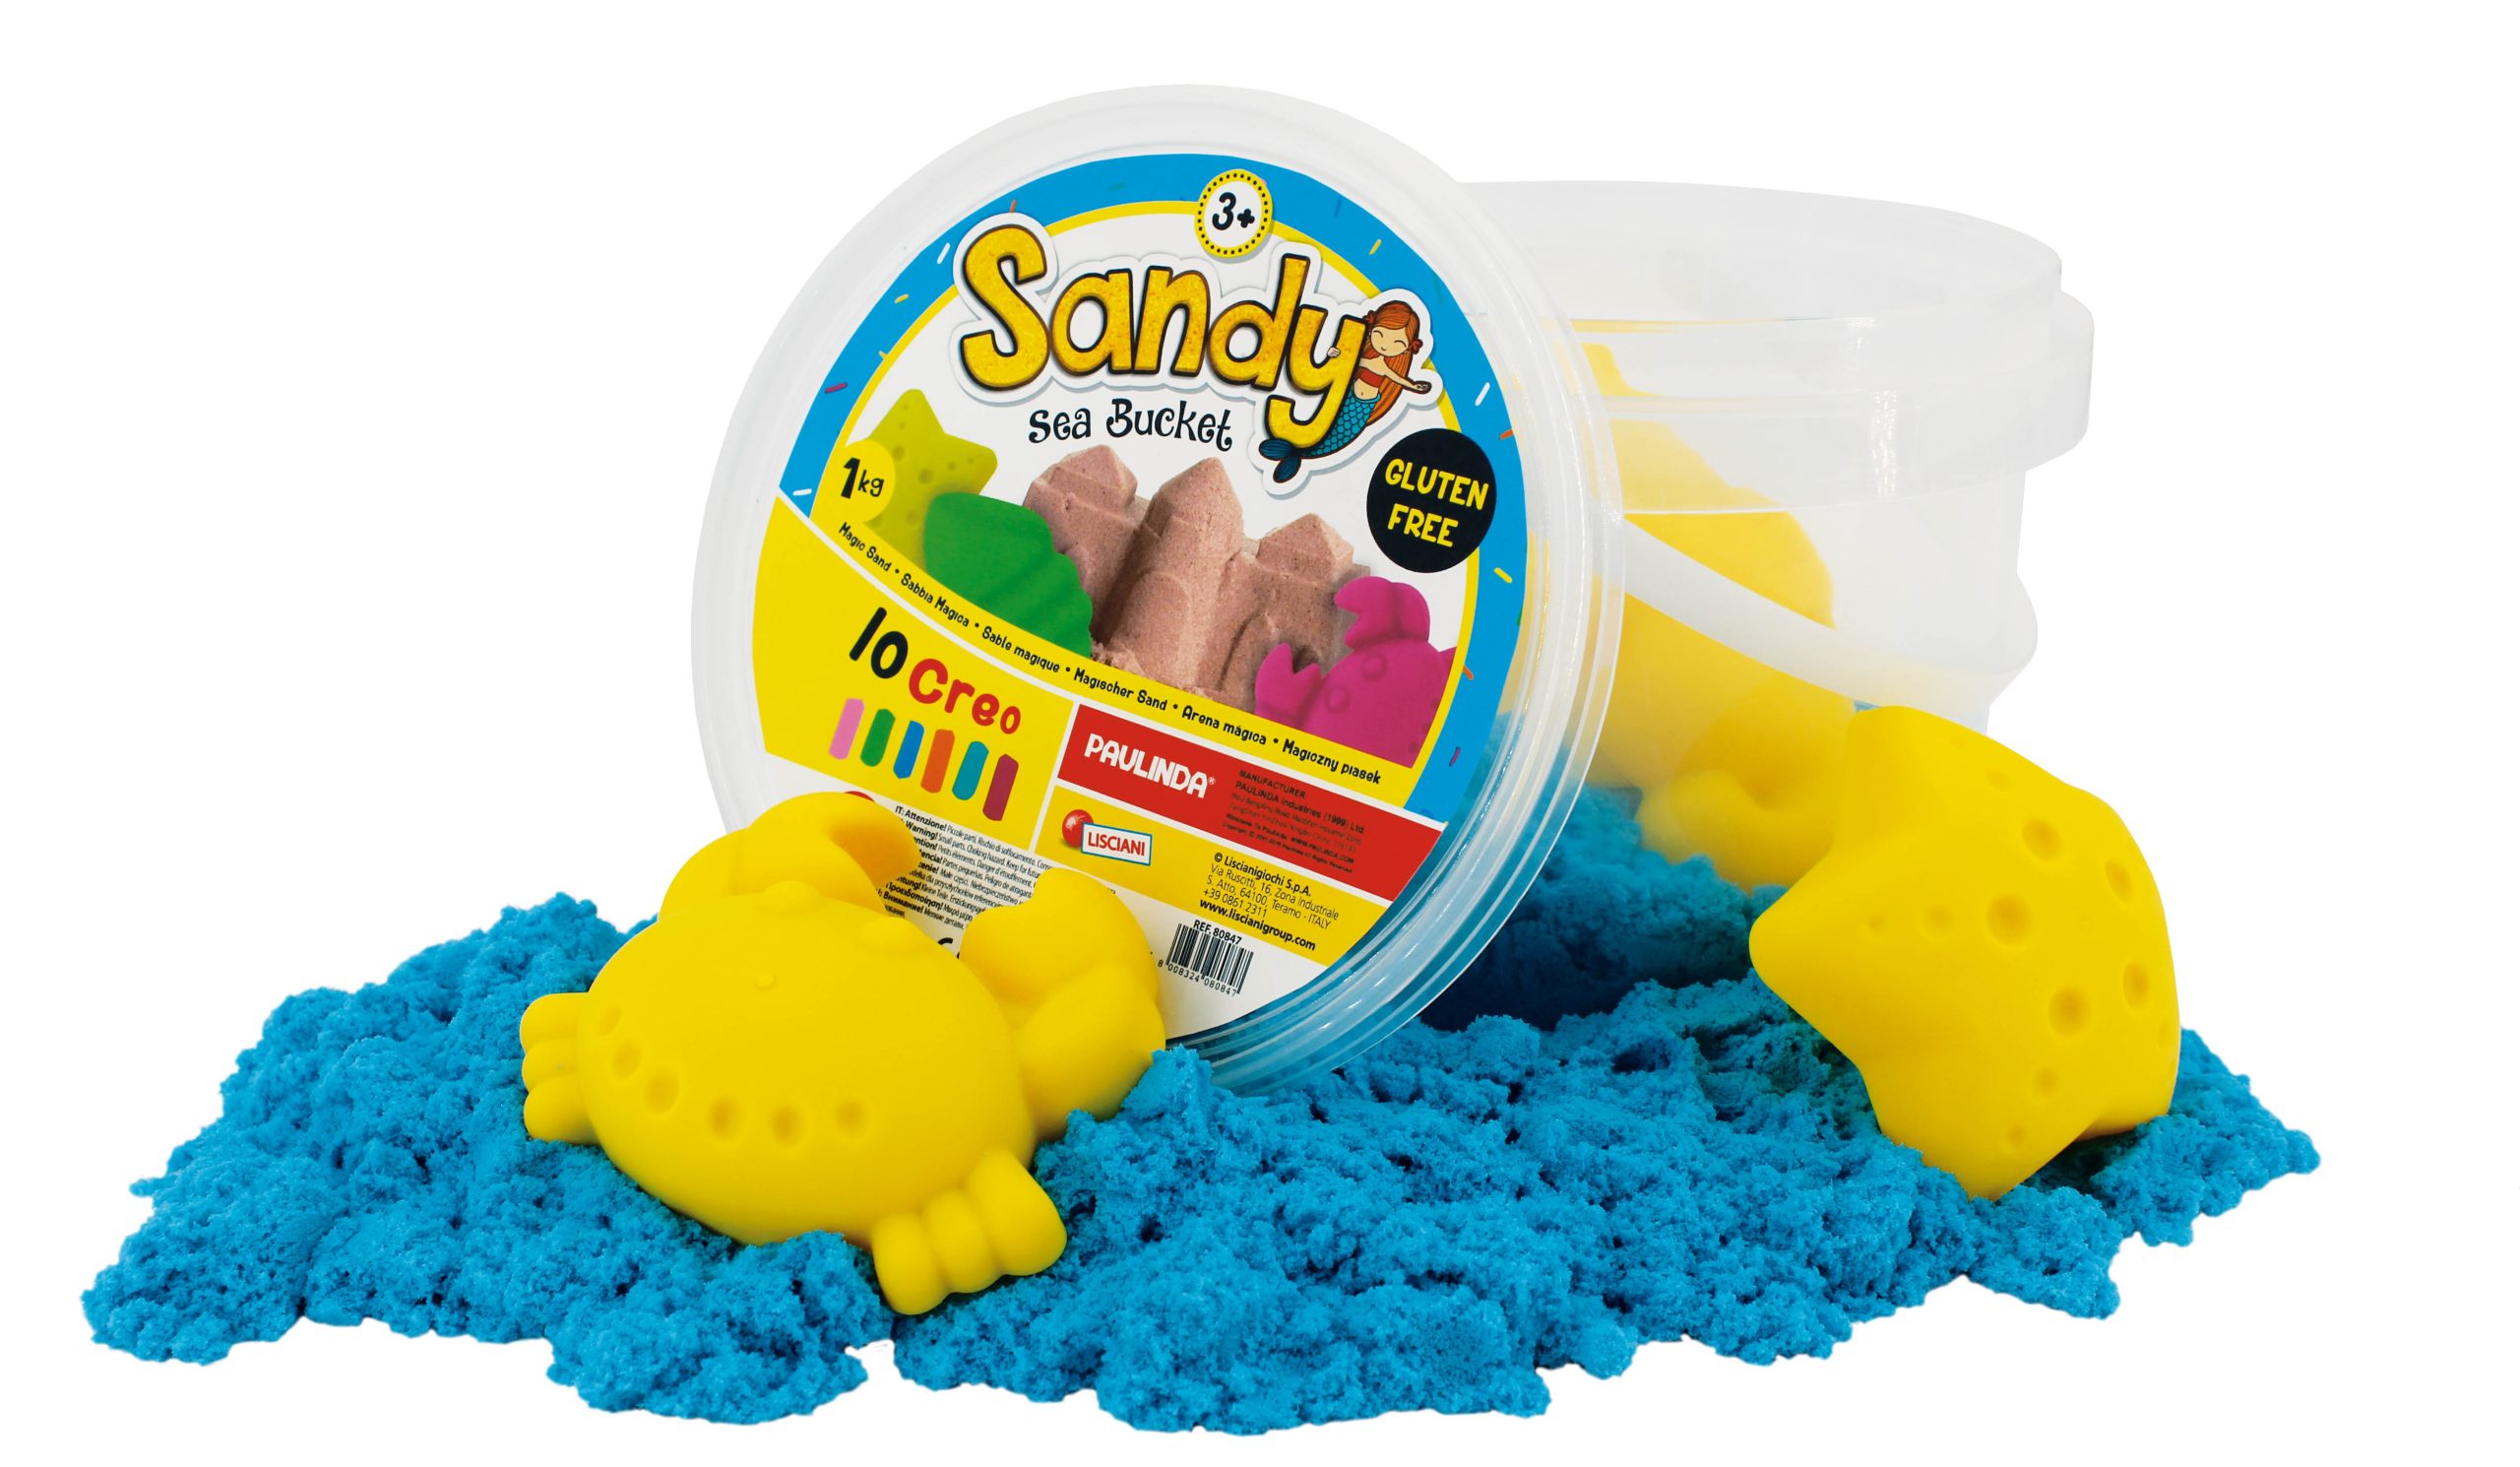 Photo 2 of the game SANDY SEA BUCKET 1 KG